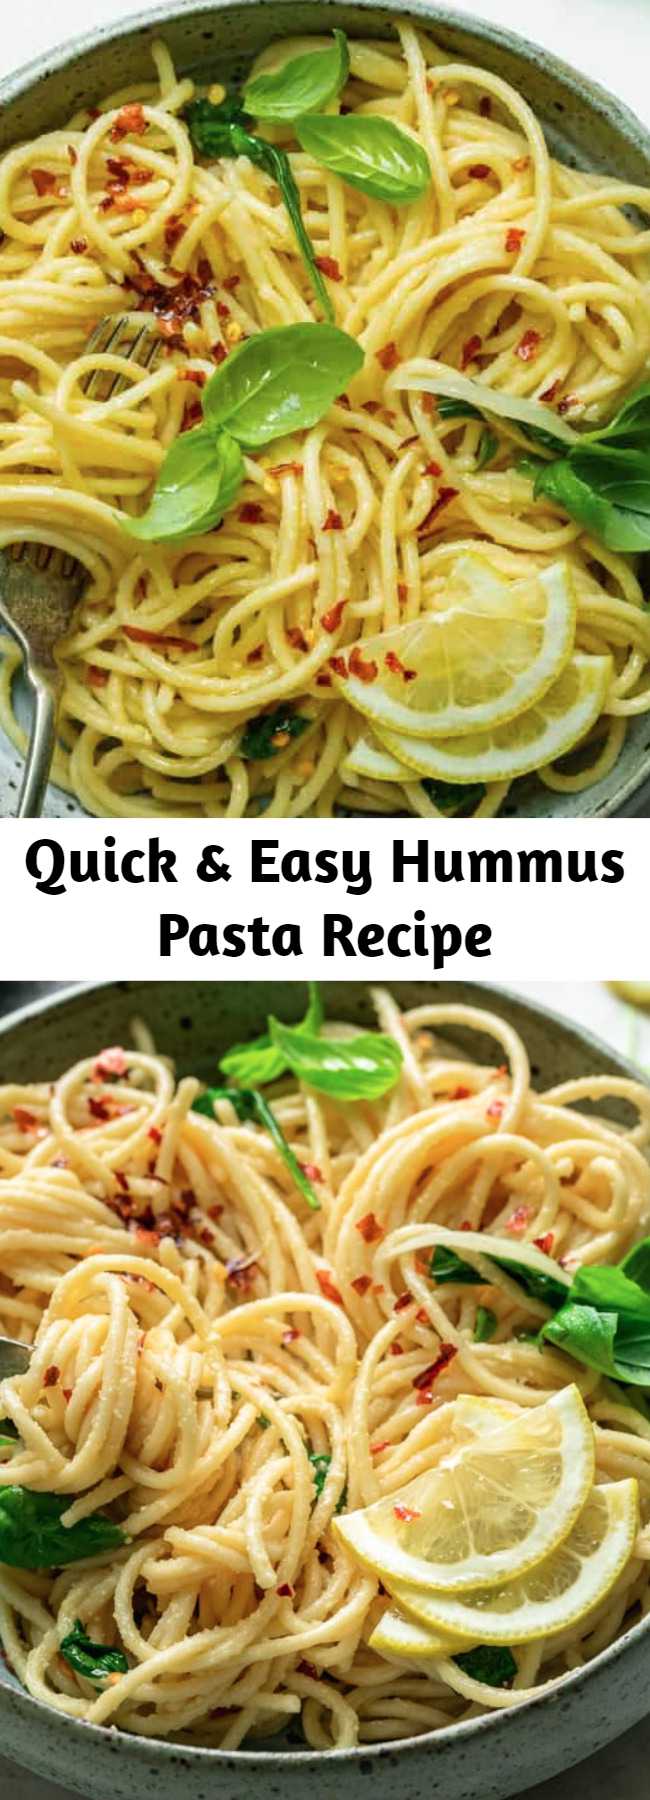 Quick & Easy Hummus Pasta Recipe - This creamy vegan Hummus Pasta is a healthy Mediterranean inspired recipe! It's all made in one pot and ready in 15 minutes - perfect for a weeknight meal! #vegan #dinner #weeknight